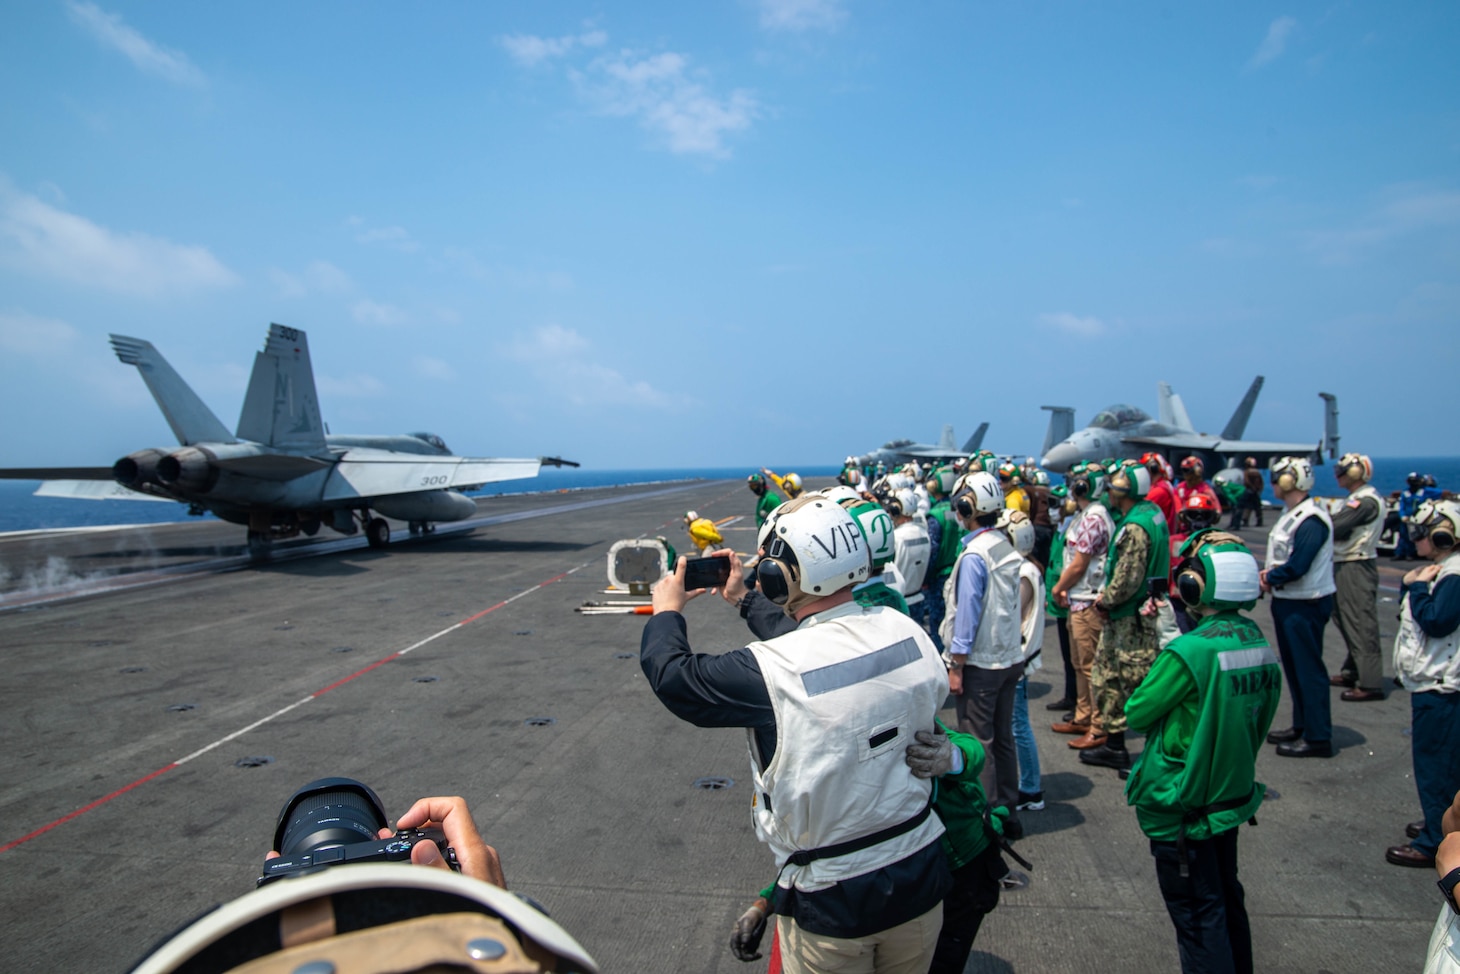 PHILIPPINE SEA (Aug. 5, 2022) Sailors assigned to the Japan Maritime Self-Defense Force (JMSDF) and media staff observe flight operations on the flight deck of the U.S. Navy’s only forward-deployed aircraft carrier USS Ronald Reagan (CVN 76) in the Philippine Sea, Aug. 5. Vice Adm. Tatsuya Fukuda, Commander, Fleet Escort Force, JMSDF and his staff, as well as members of the Japan Ministry of Defense and media personnel, observed flight operations and toured various parts of the ship during their time aboard. Ronald Reagan, the flagship of Carrier Strike Group 5, provides a combat-ready force that protects and defends the United States, and supports alliances, partnerships and collective maritime interests in the Indo-Pacific region. (U.S. Navy photo by Mass Communication Specialist 3rd Class Gray Gibson)